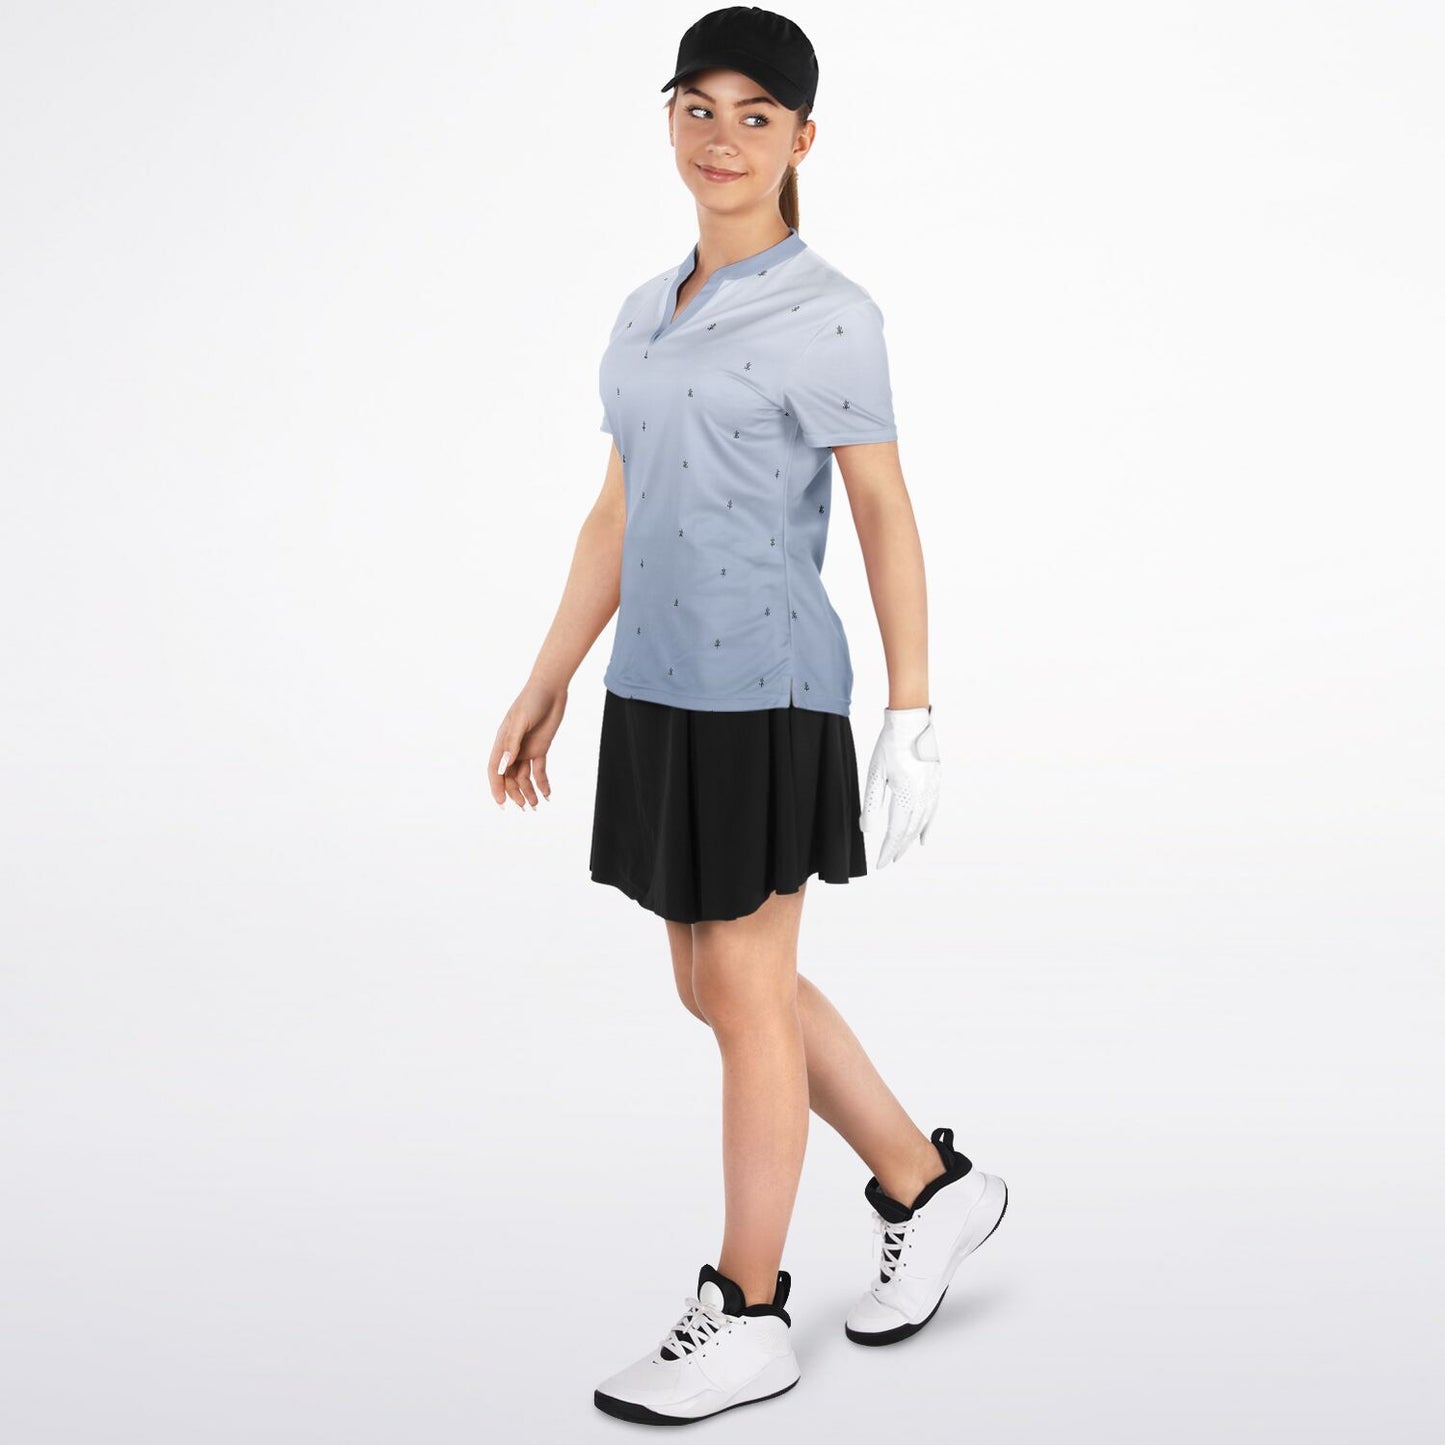 Women's Pale Blue Competition Polo